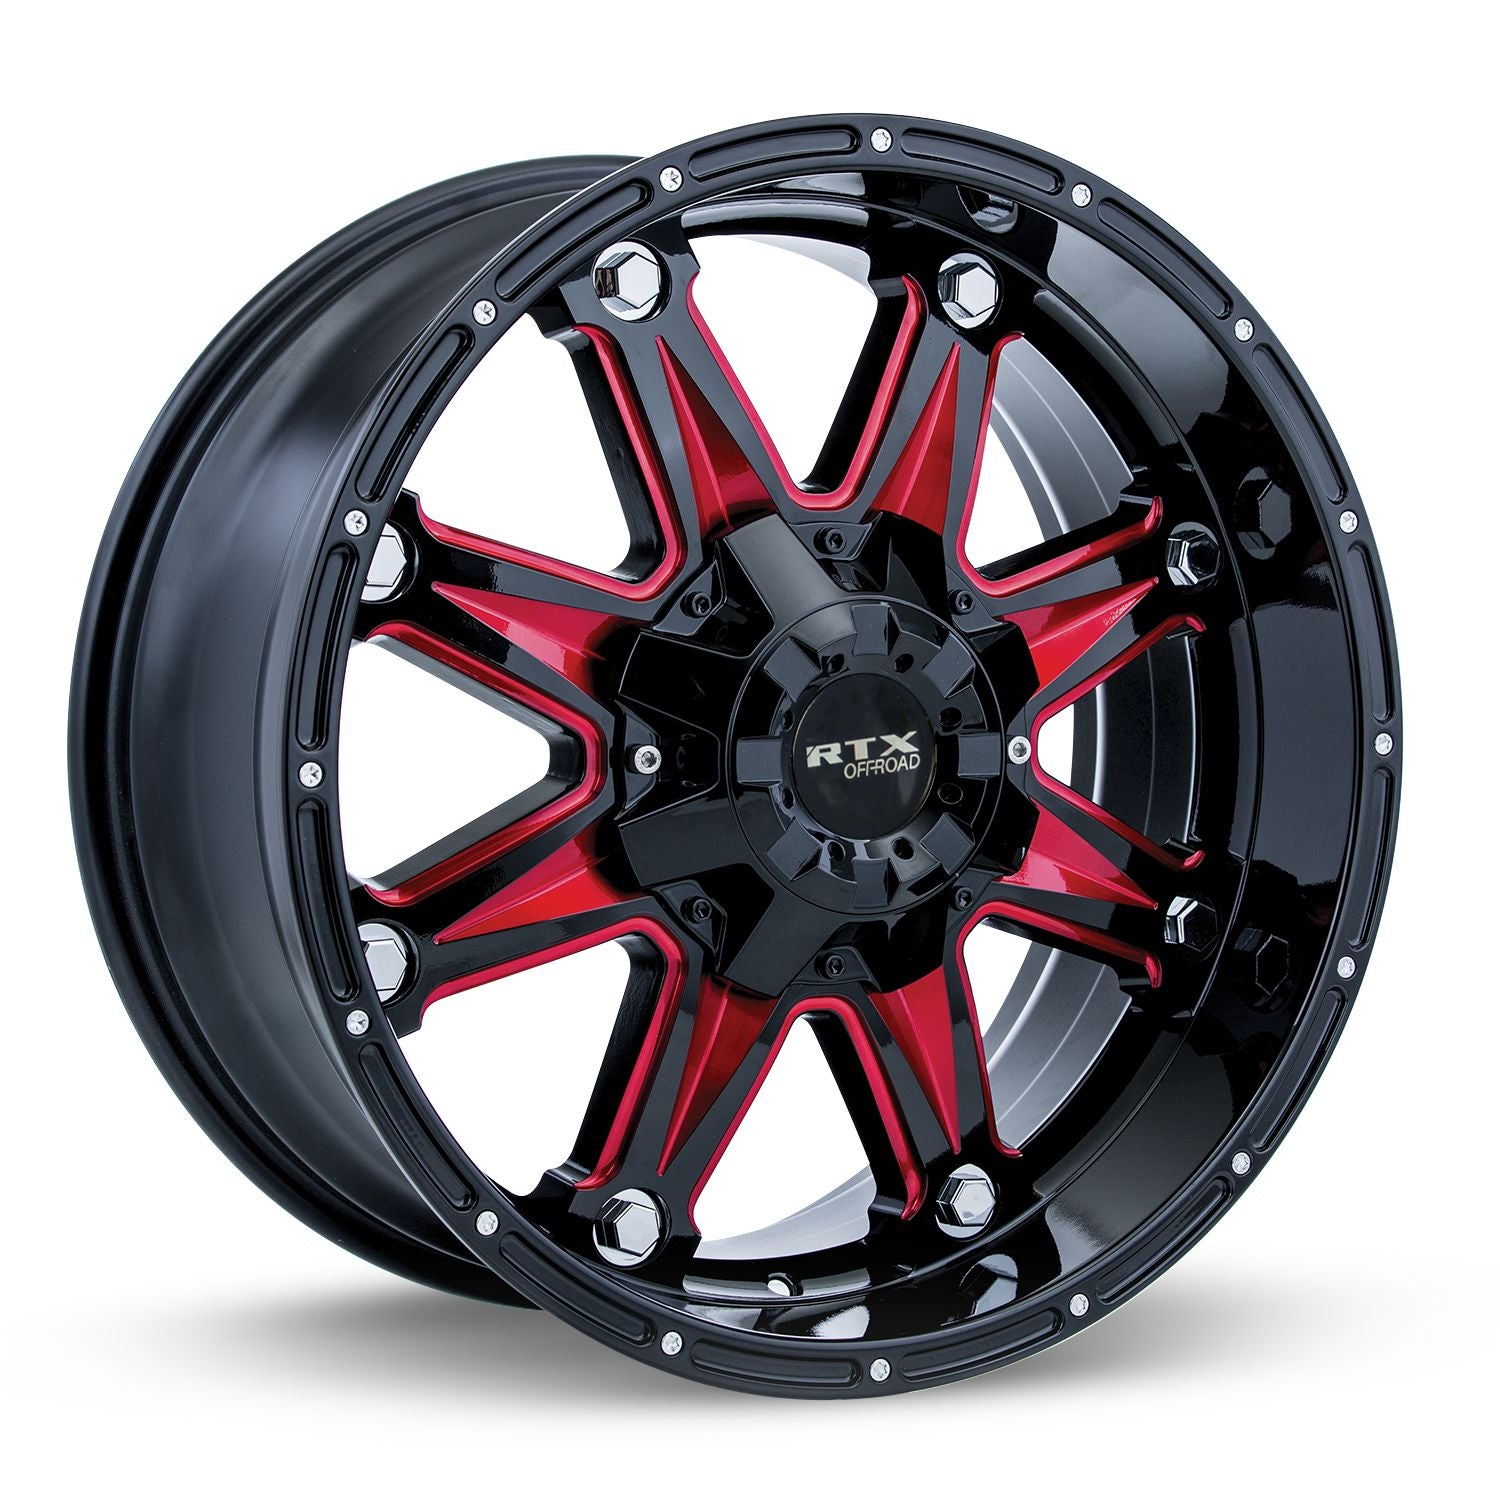 Spine • Black with Milled Red Spokes • 17x9 6x135/139.7 ET10 CB87.1